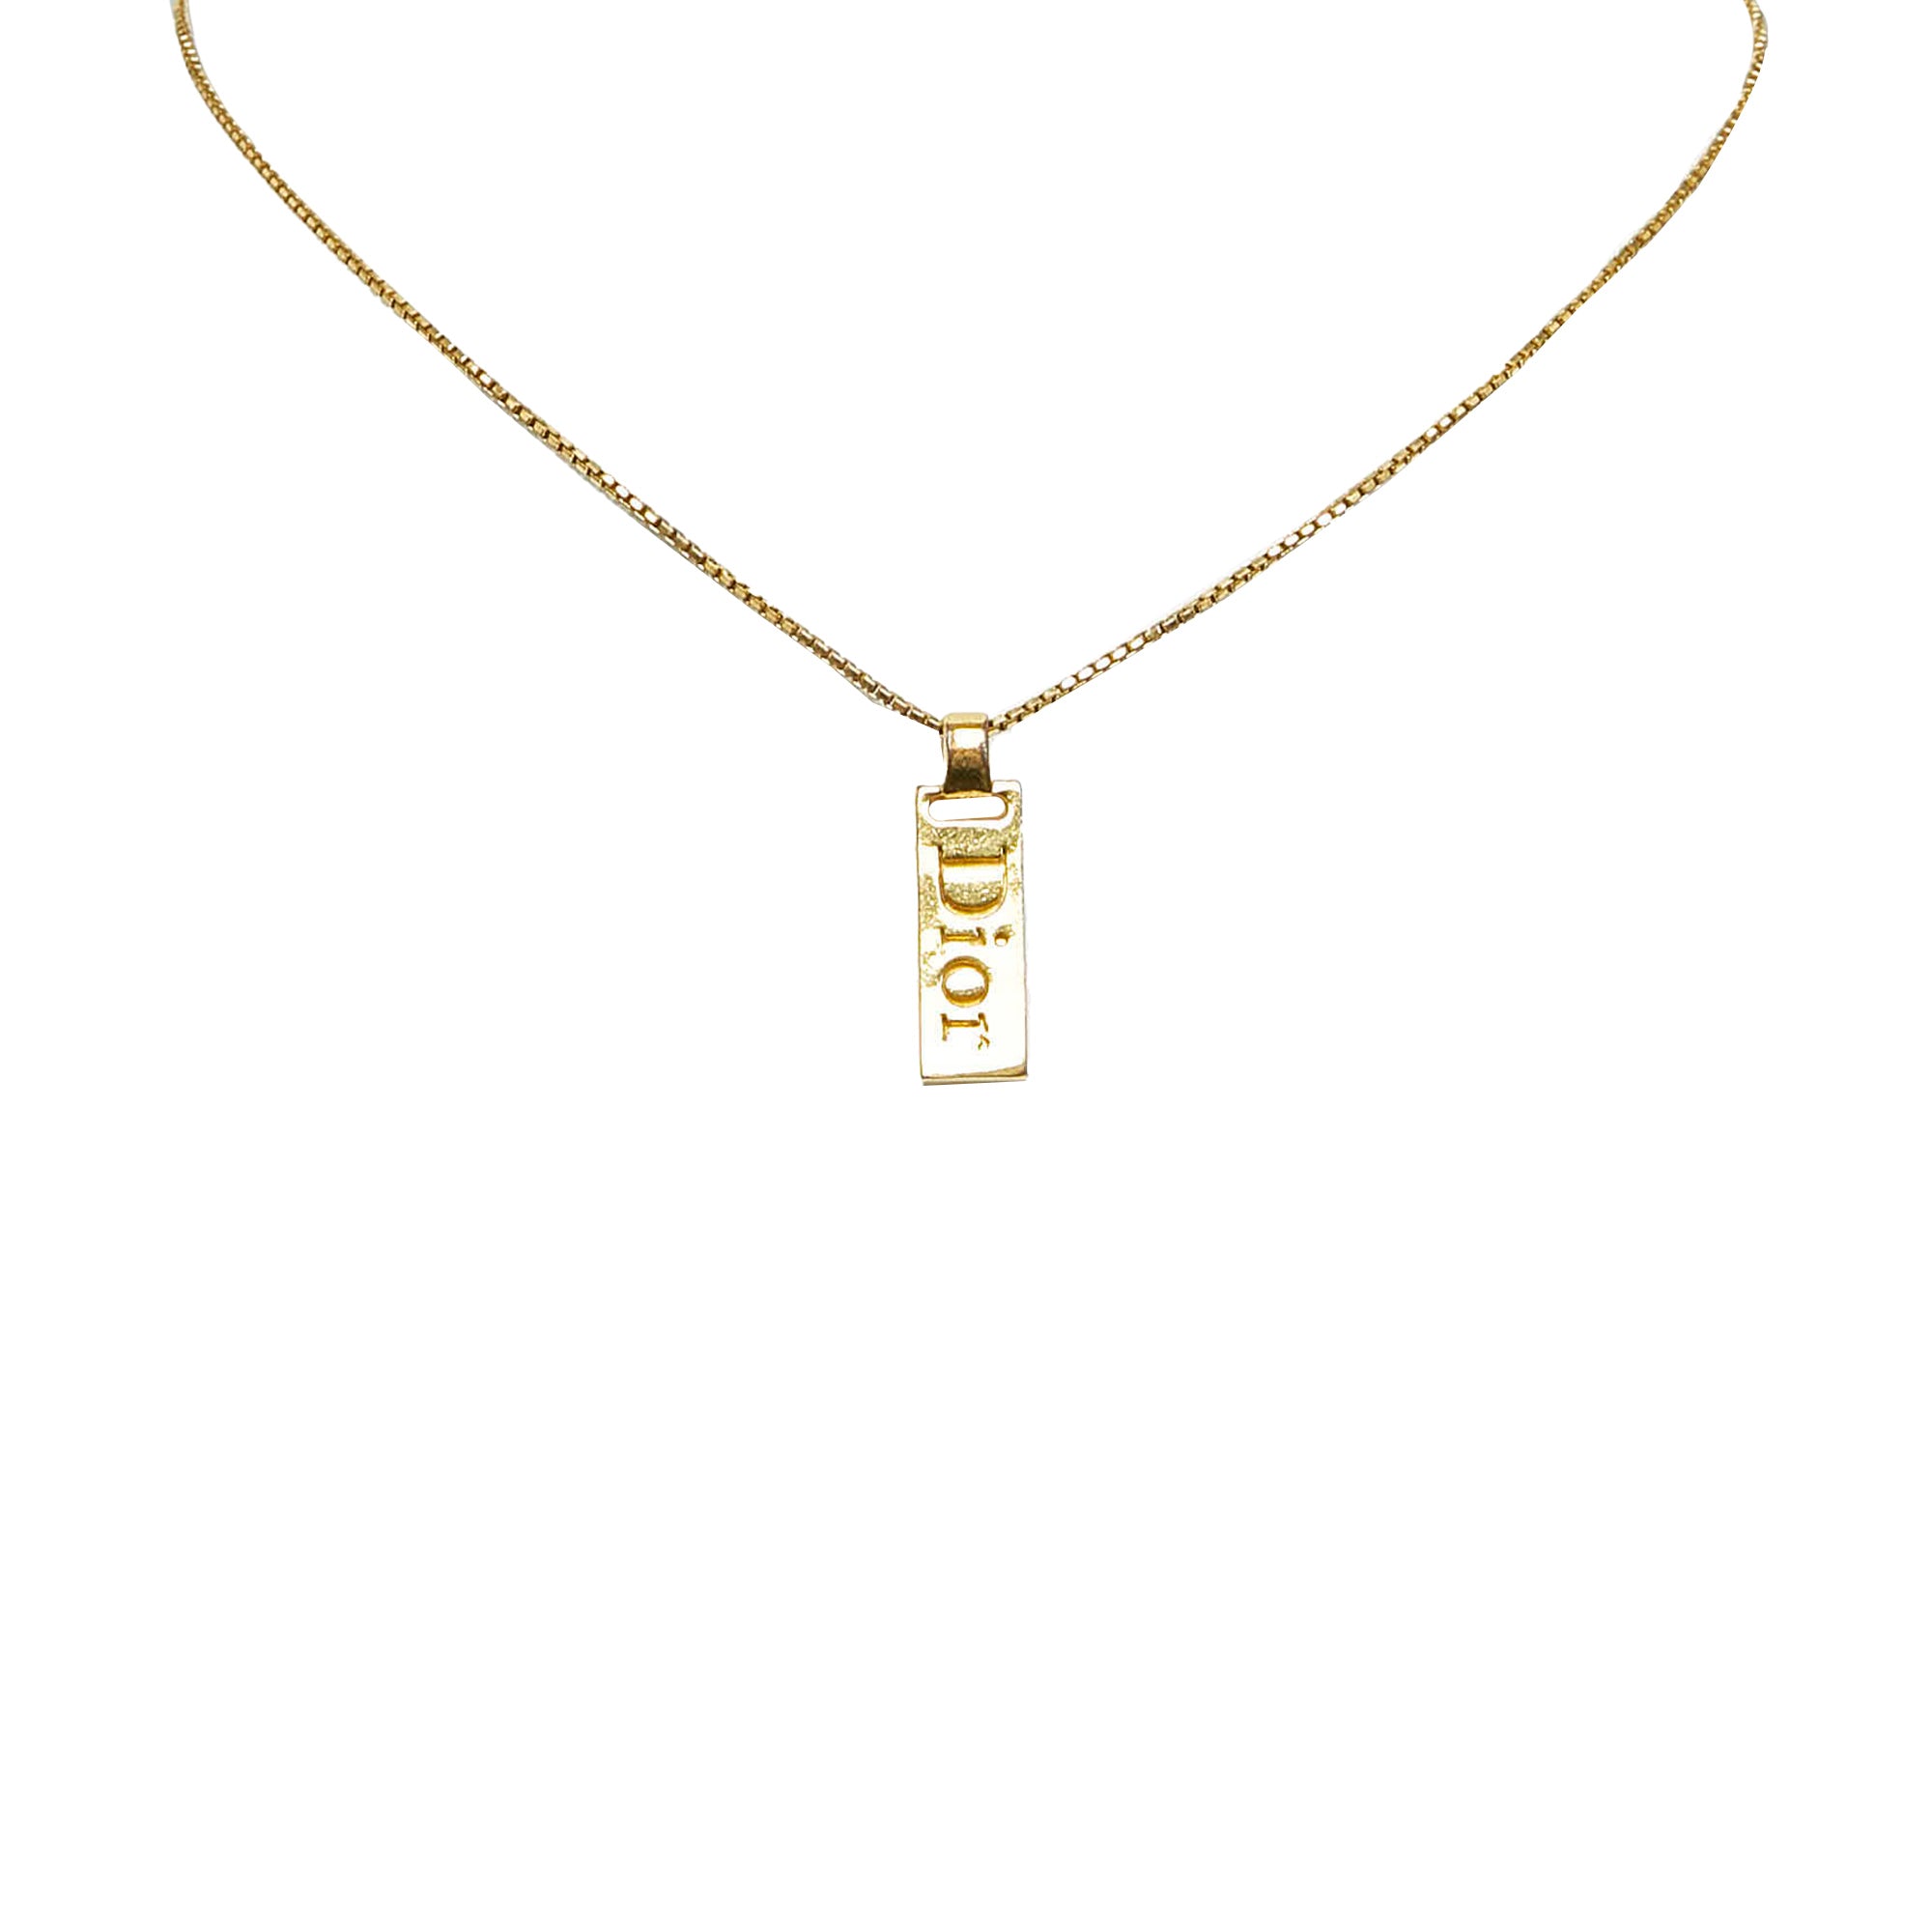 Louis Vuitton - Authenticated Essential V Necklace - Gold Plated Gold for Women, Very Good Condition